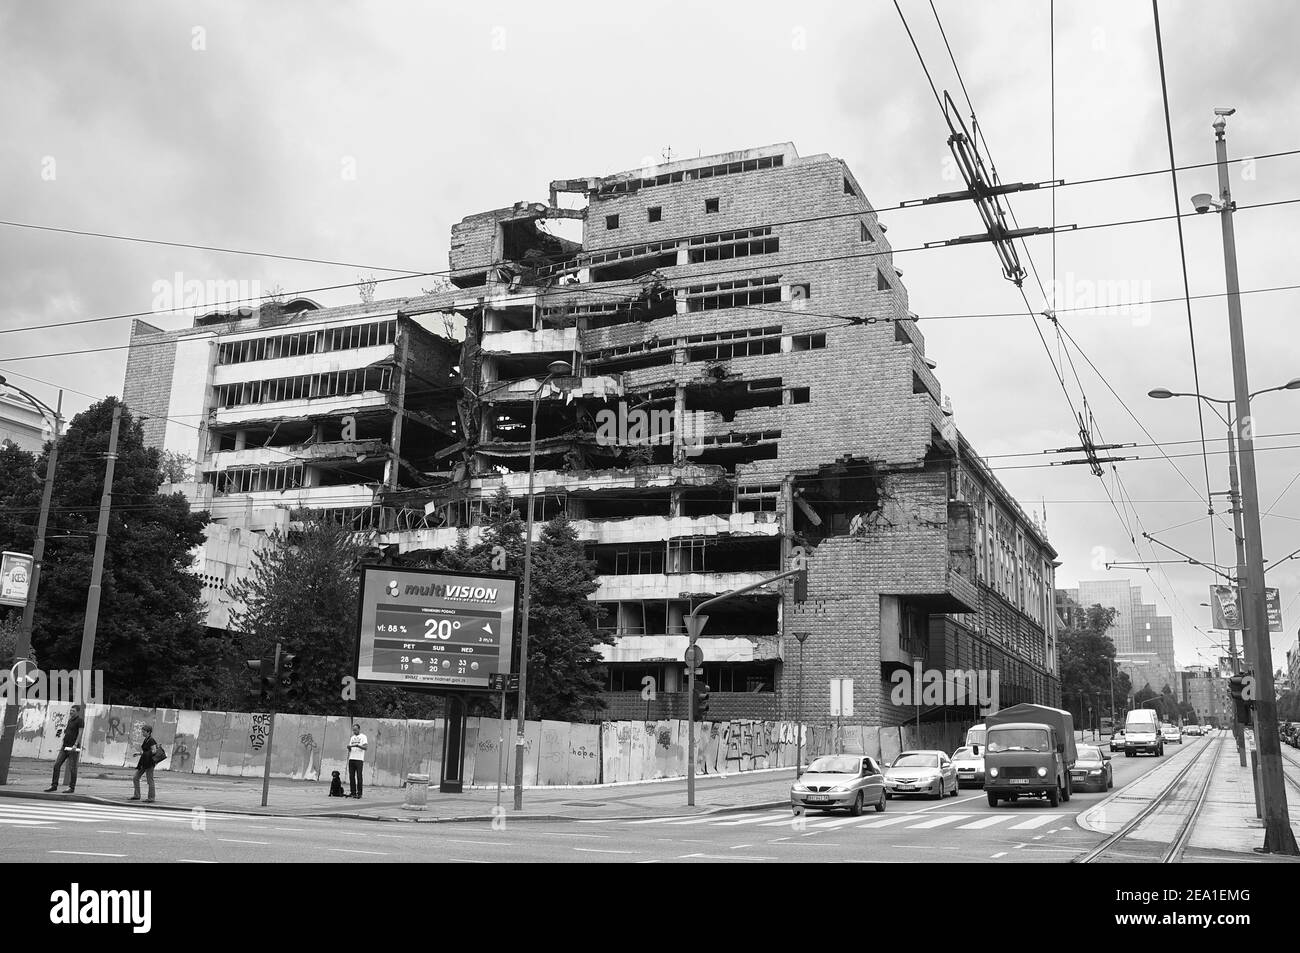 BELGRAD, SERBIA - AUGUST 01: ruins of Ministry of Defense building bombed by NATO in 1999. Shot in 2014 Stock Photo